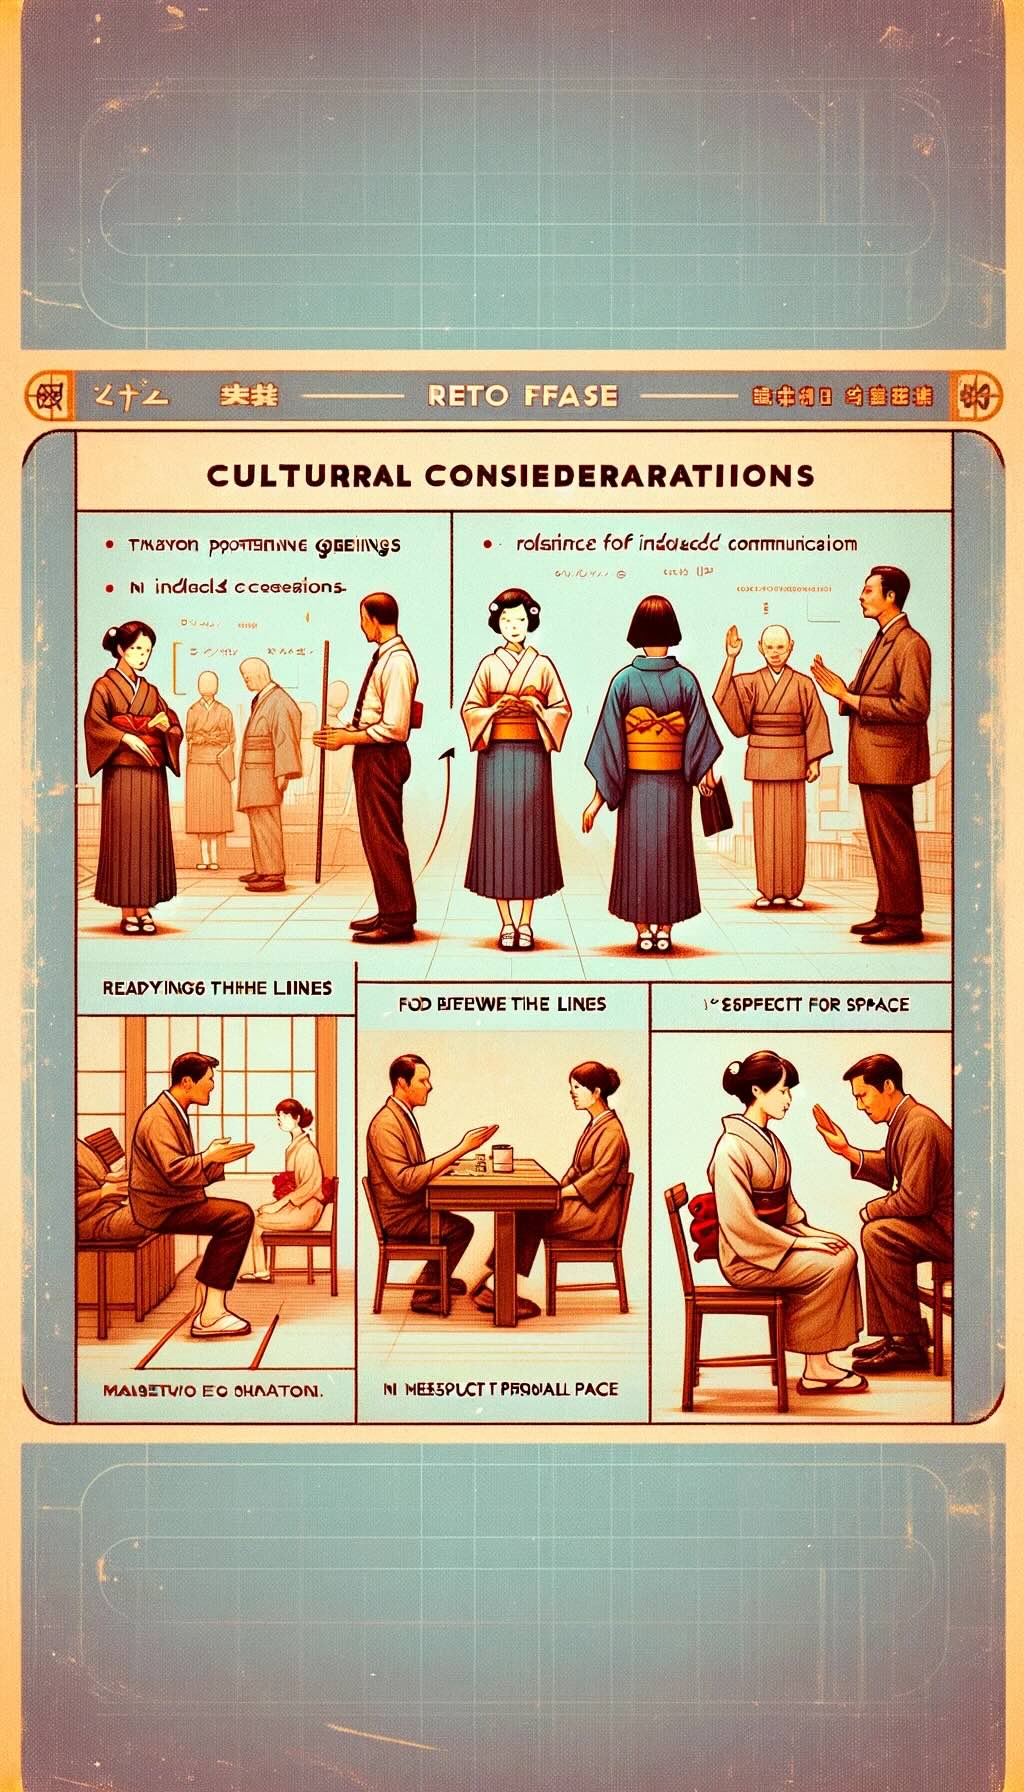 Cultural considerations in communication in Japan depicts the grace of politeness in interactions, the dance of indirect communication, and the respect for personal space. It visualizes scenes of travelers practicing polite greetings, reading between the lines in responses, and maintaining respectful distances in public spaces. The image captures the essence of Japanese culture where respect and subtlety are paramount, showcasing how these cultural nuances influence communication and adding a touch of nostalgia and warmth, reflecting the depth and elegance of Japanese social customs